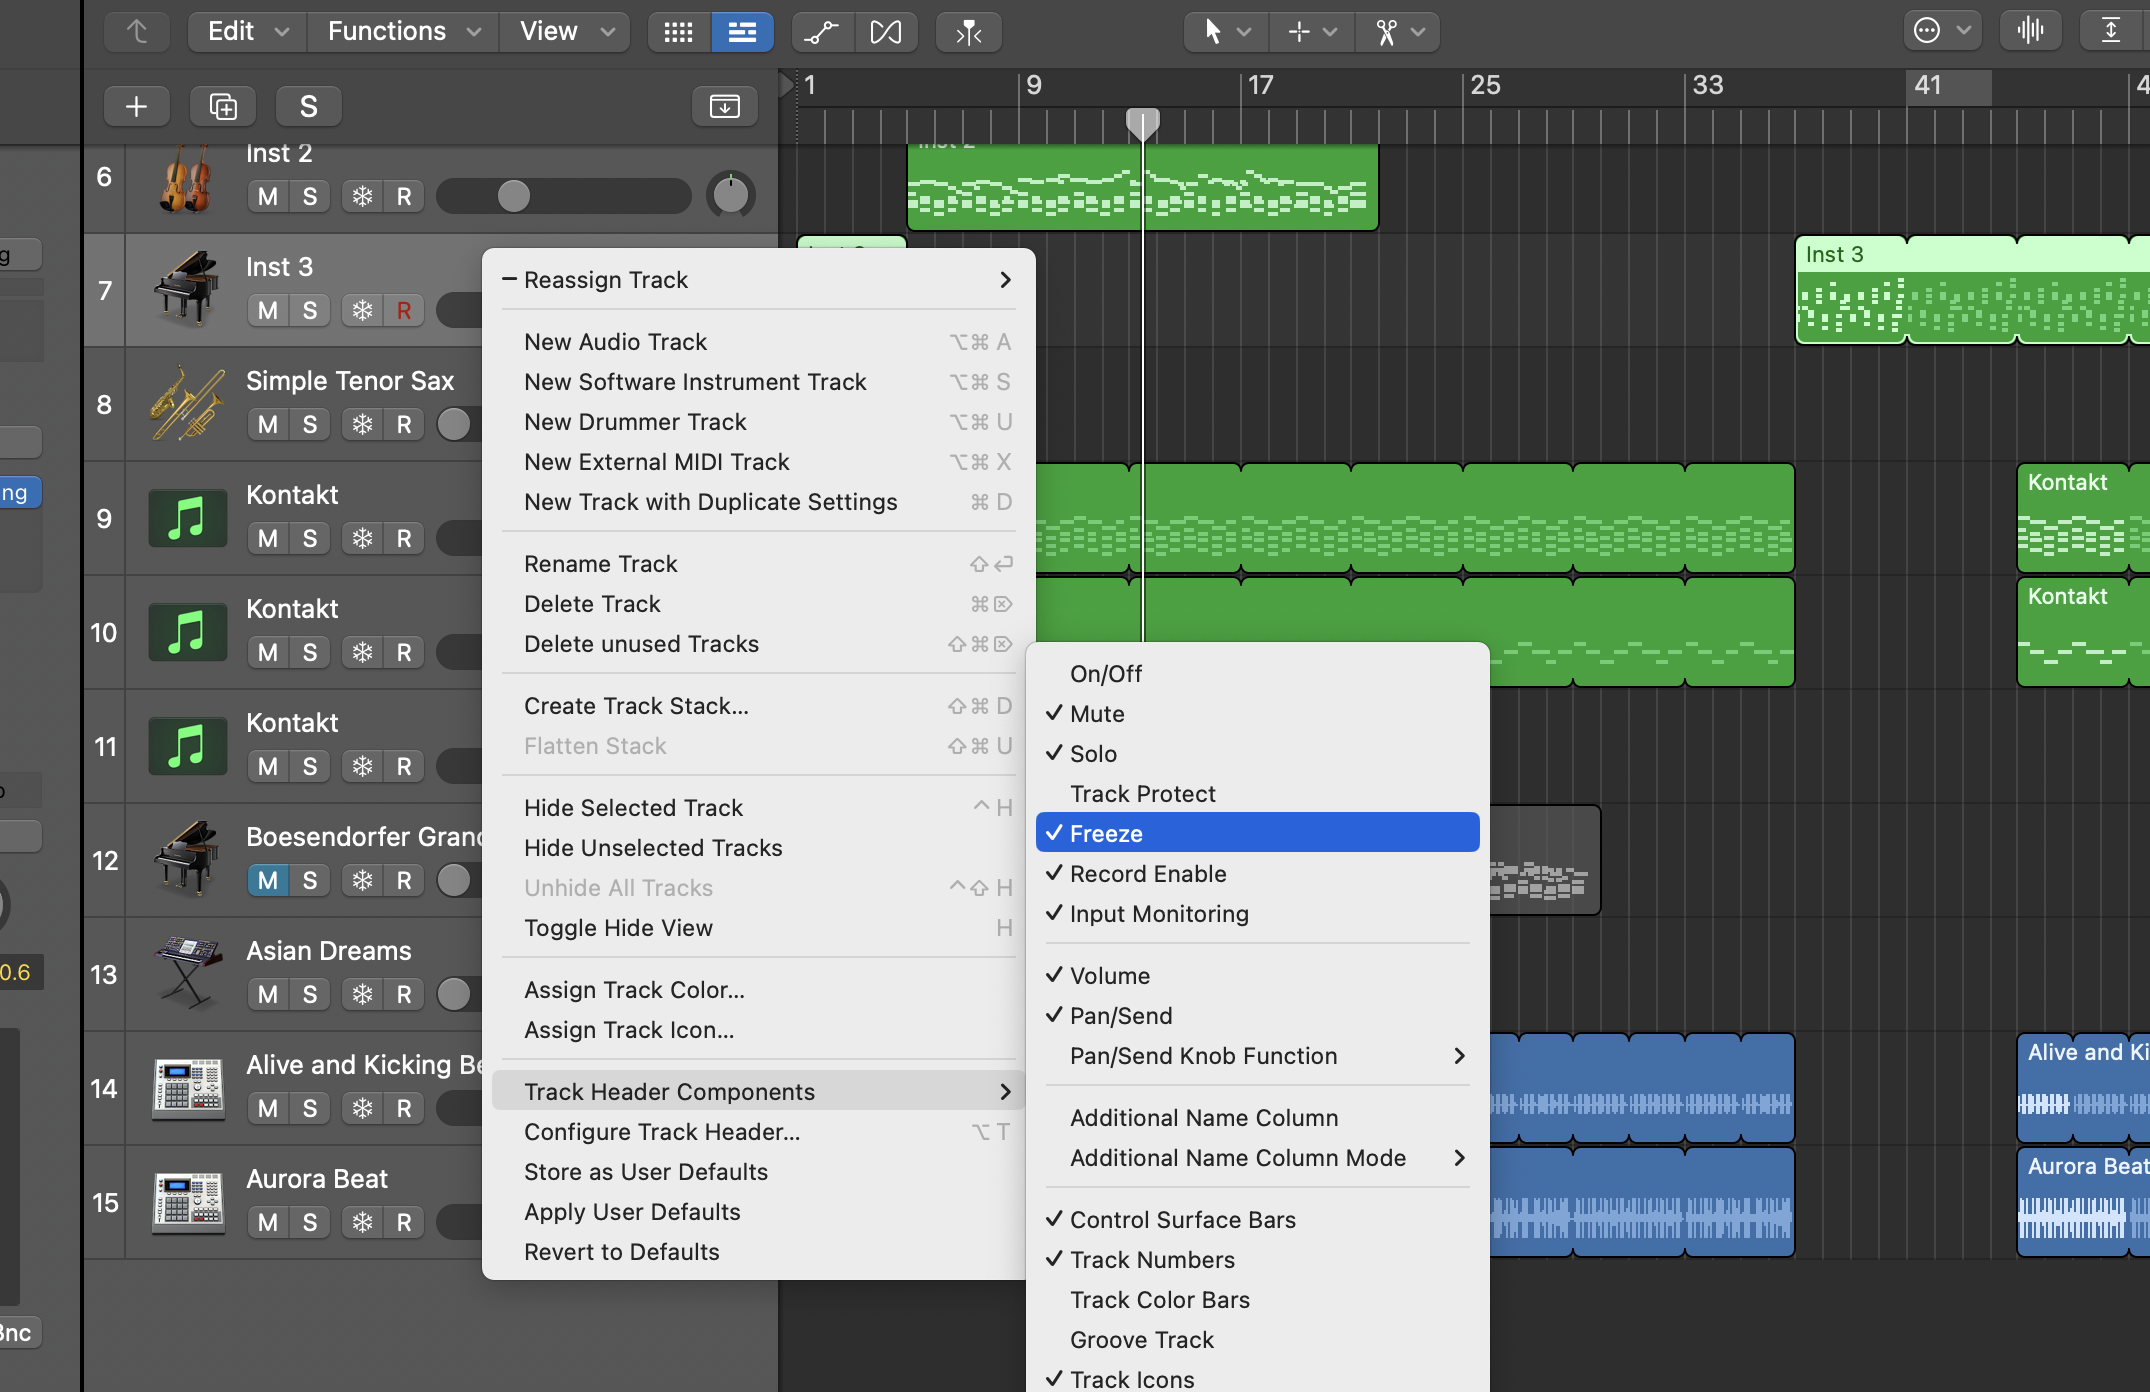 Did You Know You Could Freeze Your Tracks on Logic Pro X? Here’s How!